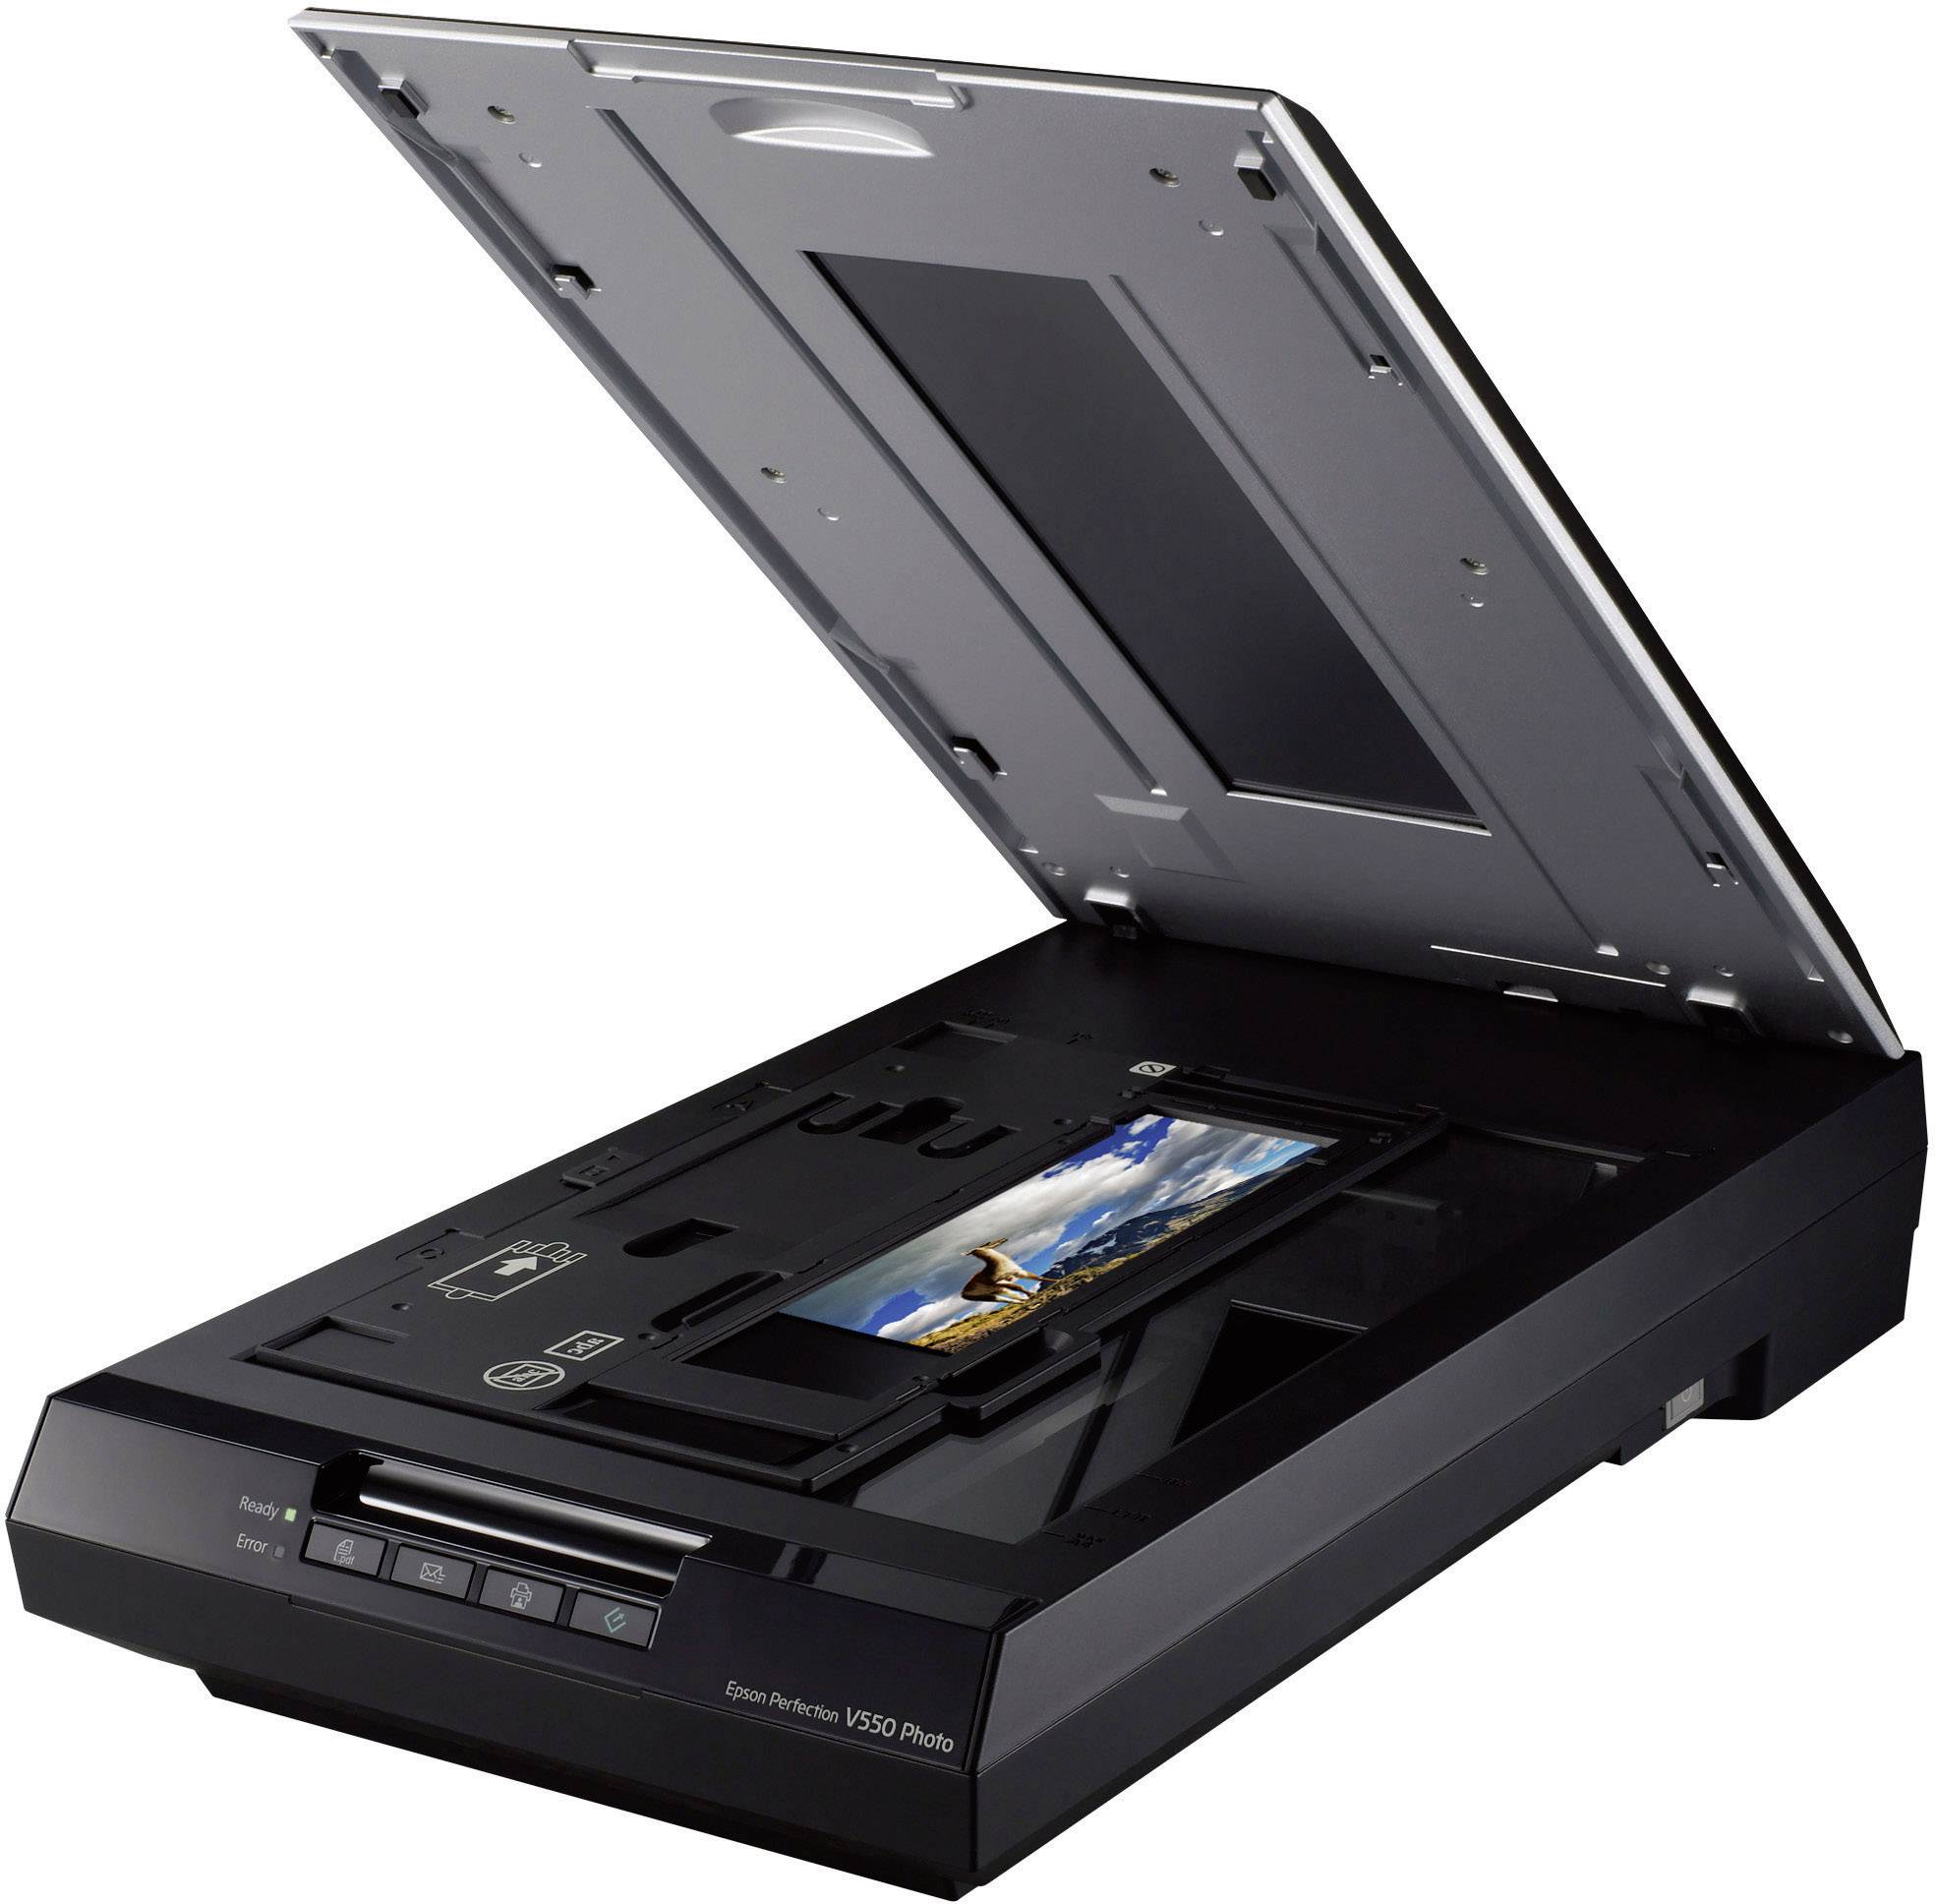  Epson  Perfection V550 Photo Flatbed scanner  A4 6400 x 9600 